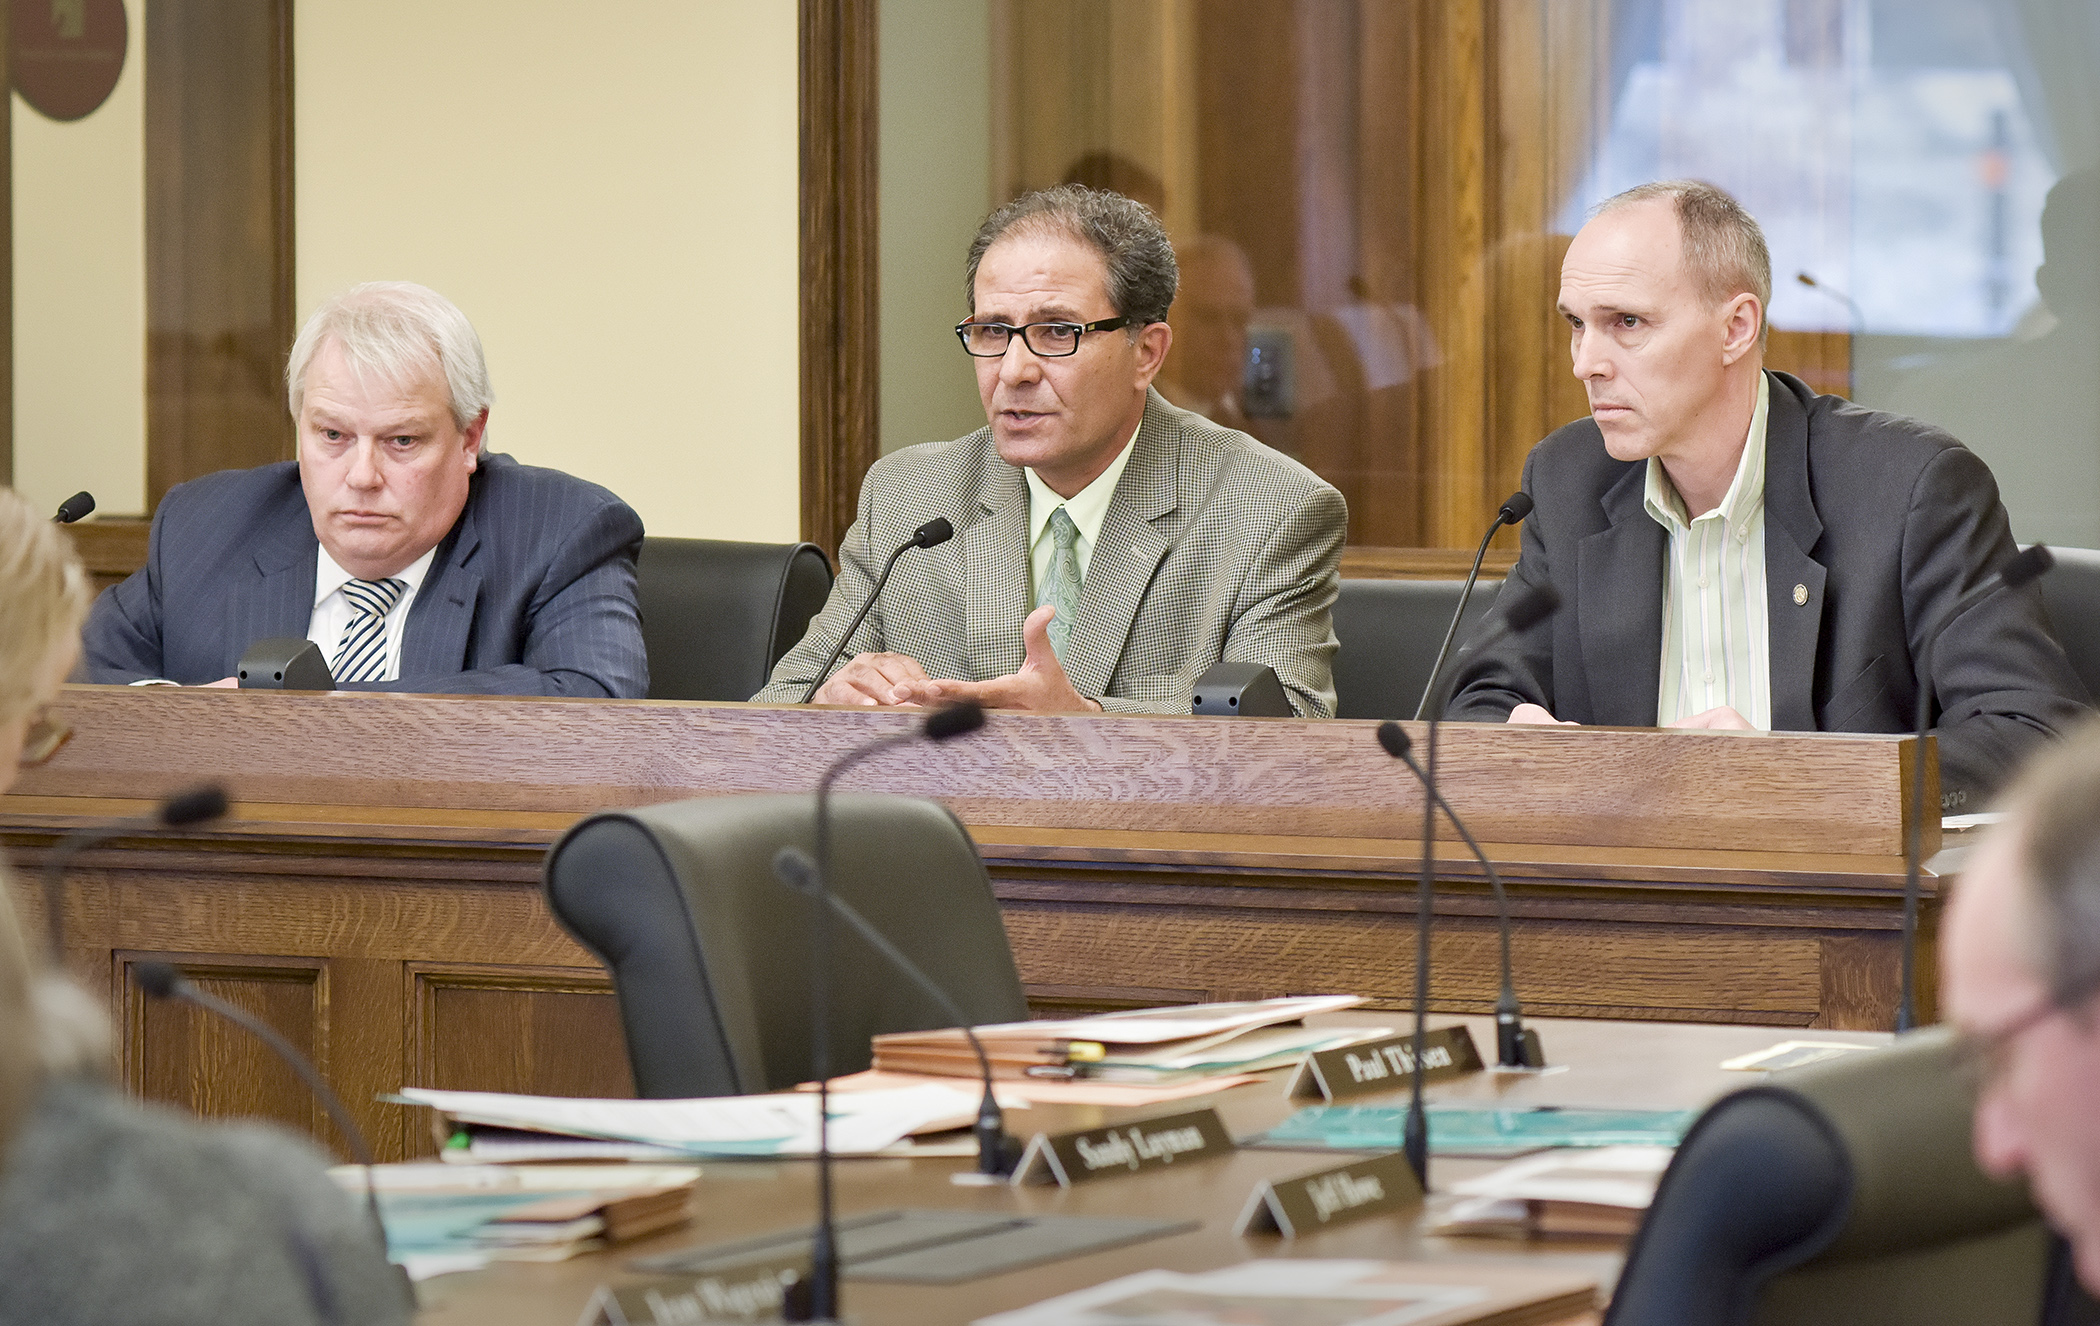 Dan Dorman, left, executive director of the Greater Minnesota Partnership, and Abraham Algadi, center, executive director of the Worthington Regional Economic Development Corporation, testify before the House Job Growth and Energy Affordability Policy and Finance Committee in support of a bill sponsored by Rep. Rod Hamilton, right, that would establish a refundable workforce housing tax credit. Photo by Andrew VonBank